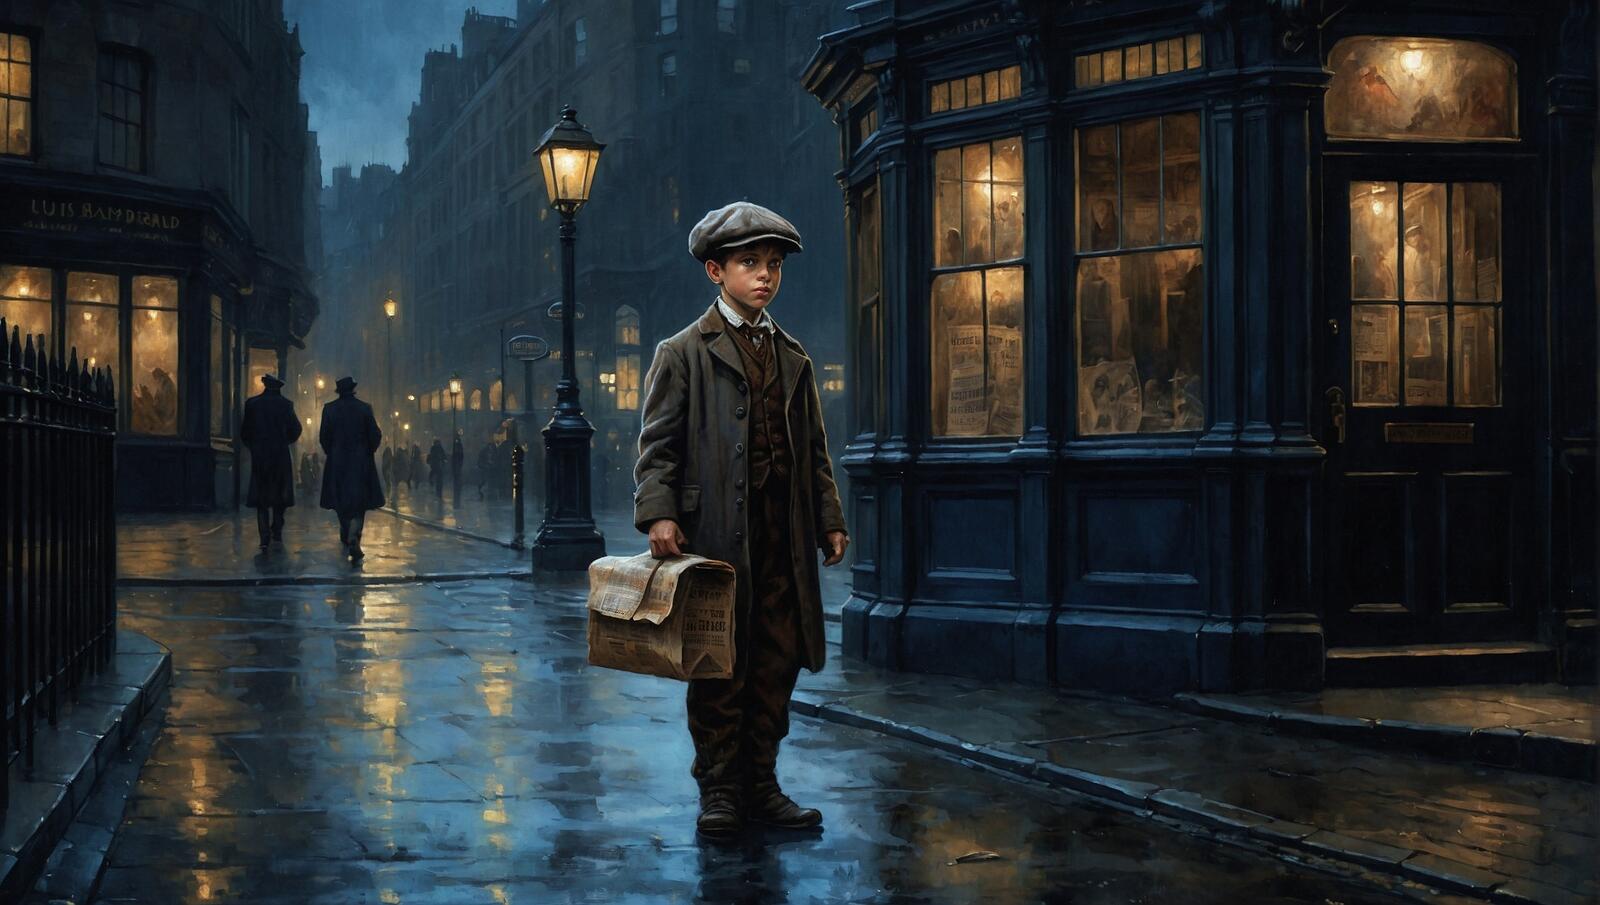 Free photo A boy standing on a wet street in a nighttime city with a suitcase